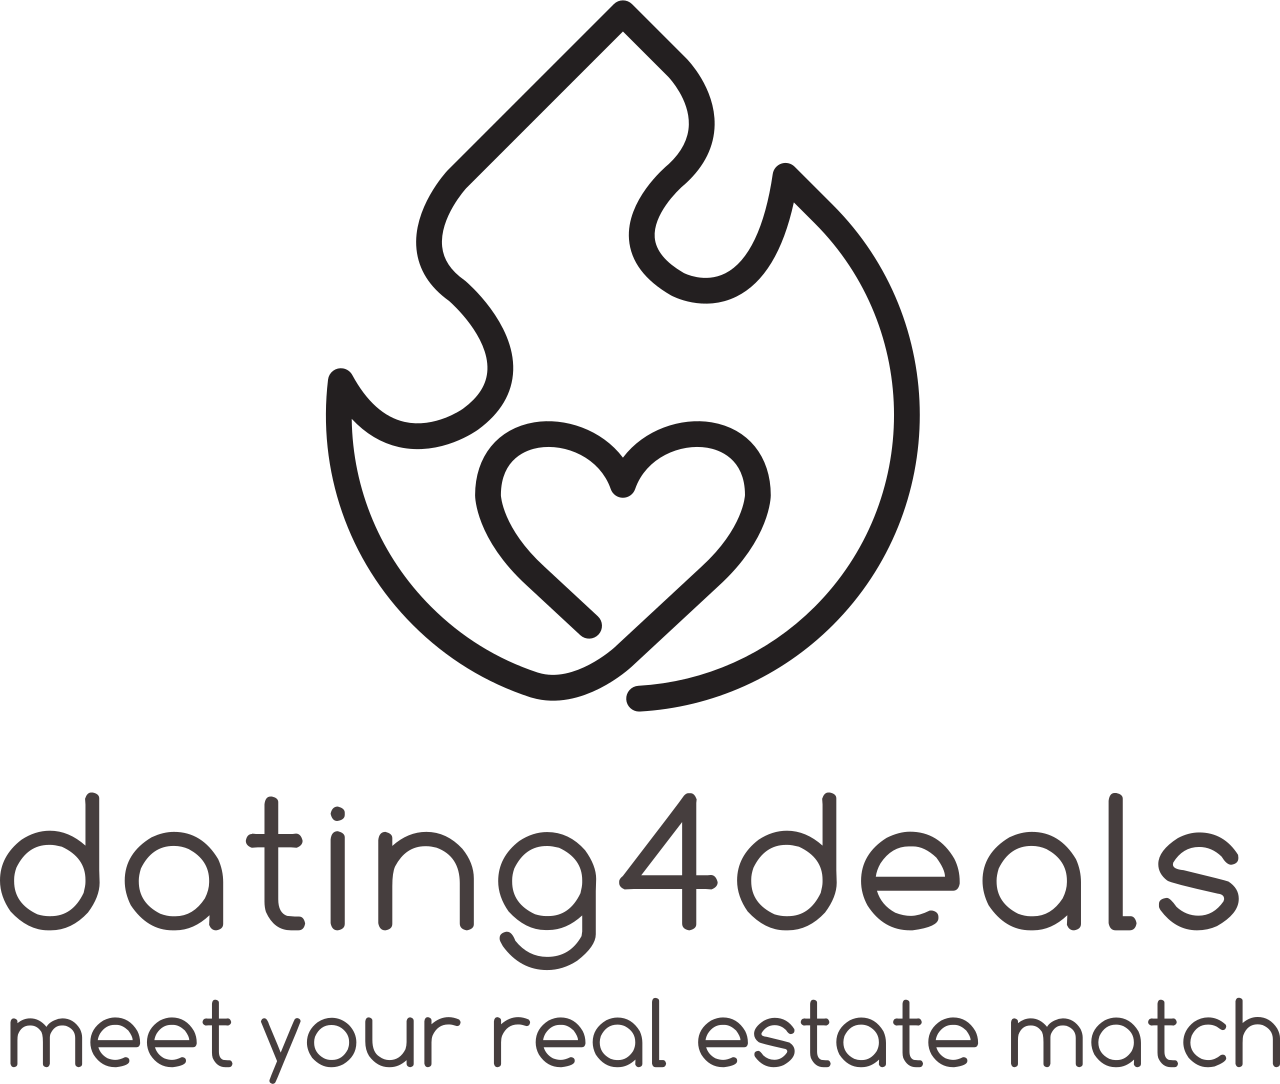 dating4deals's web page